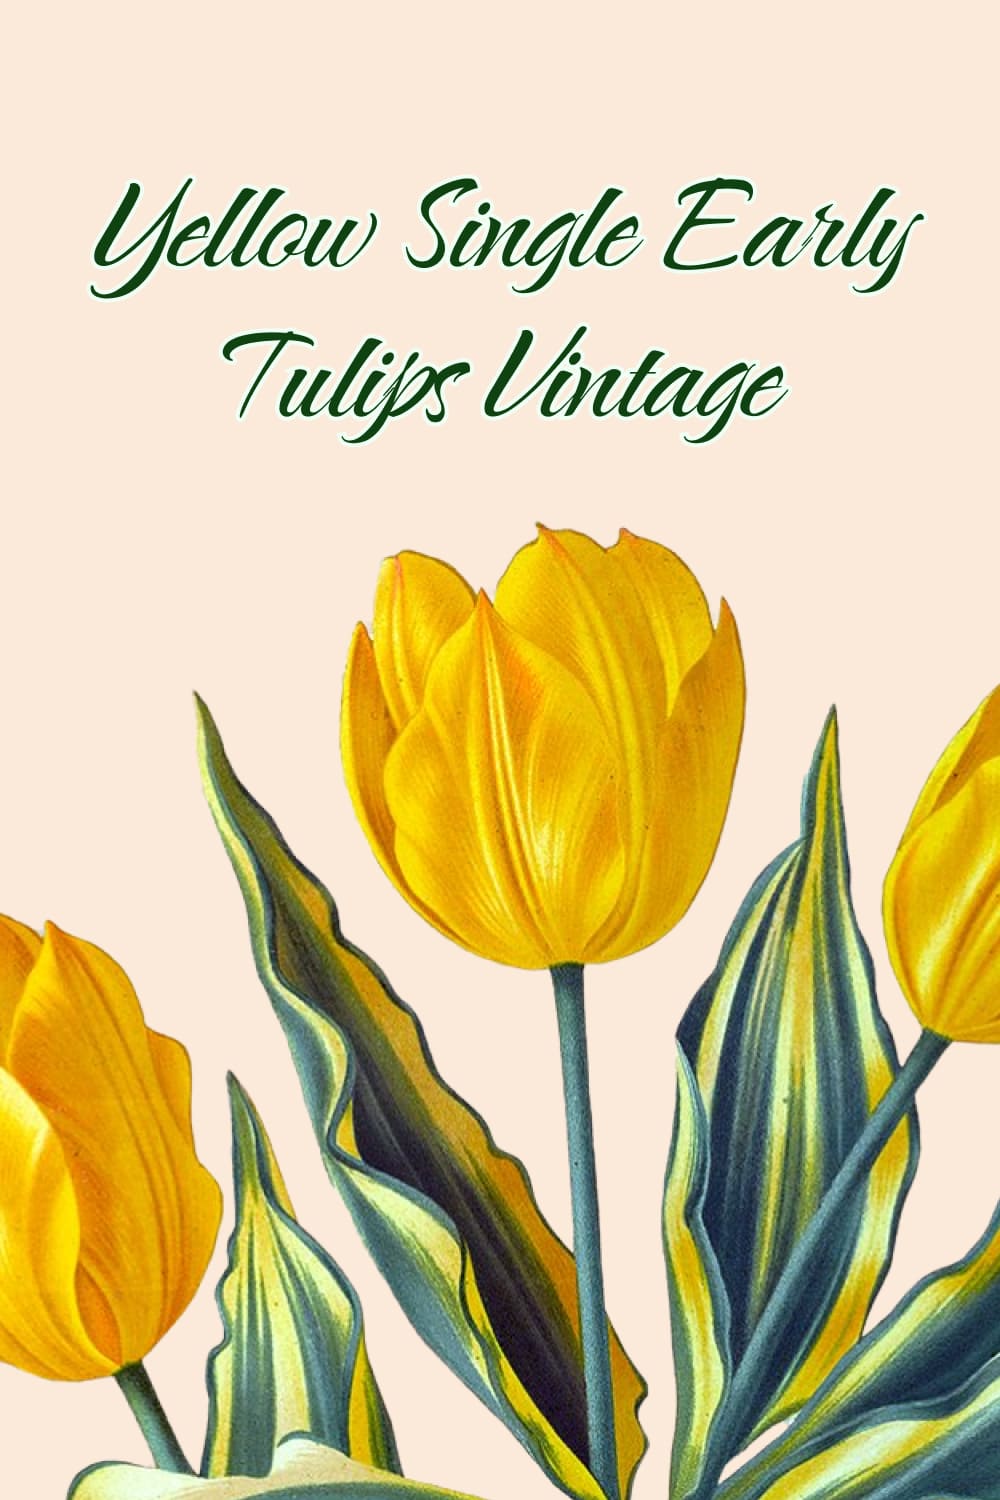 Yellow Single Early Tulips Vintage - preview image.